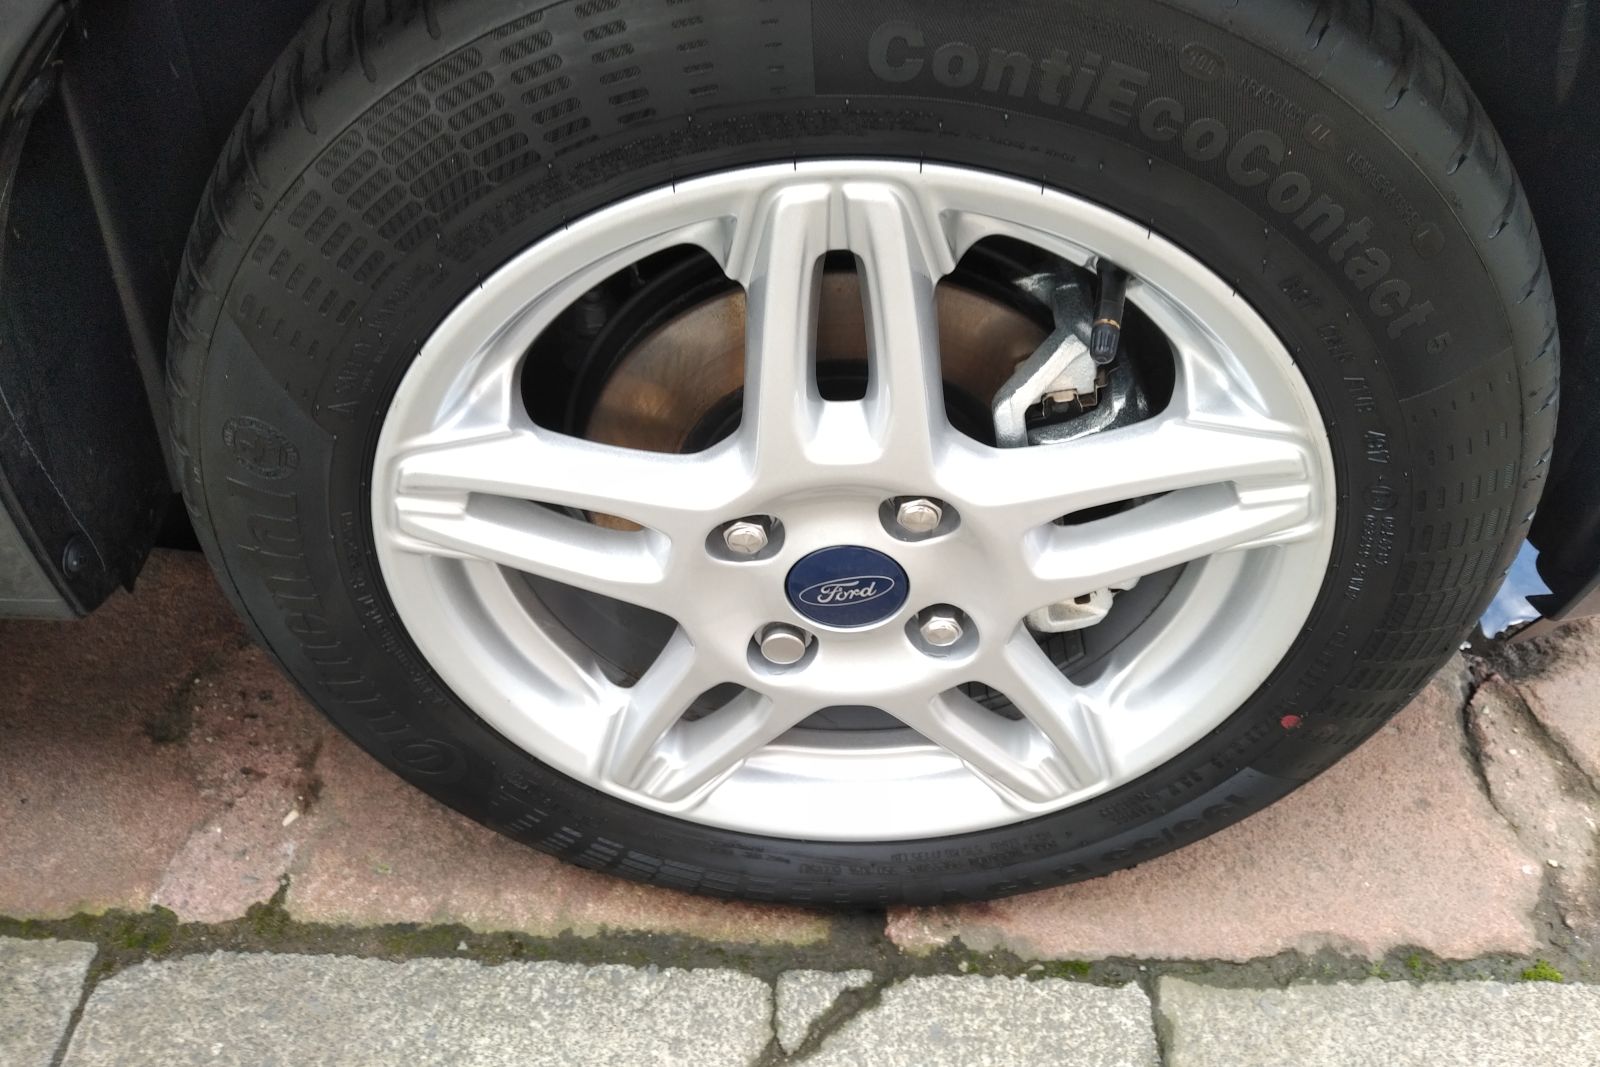 Wheels thoroughly cleaned, sealed, dried and tyres dressed 